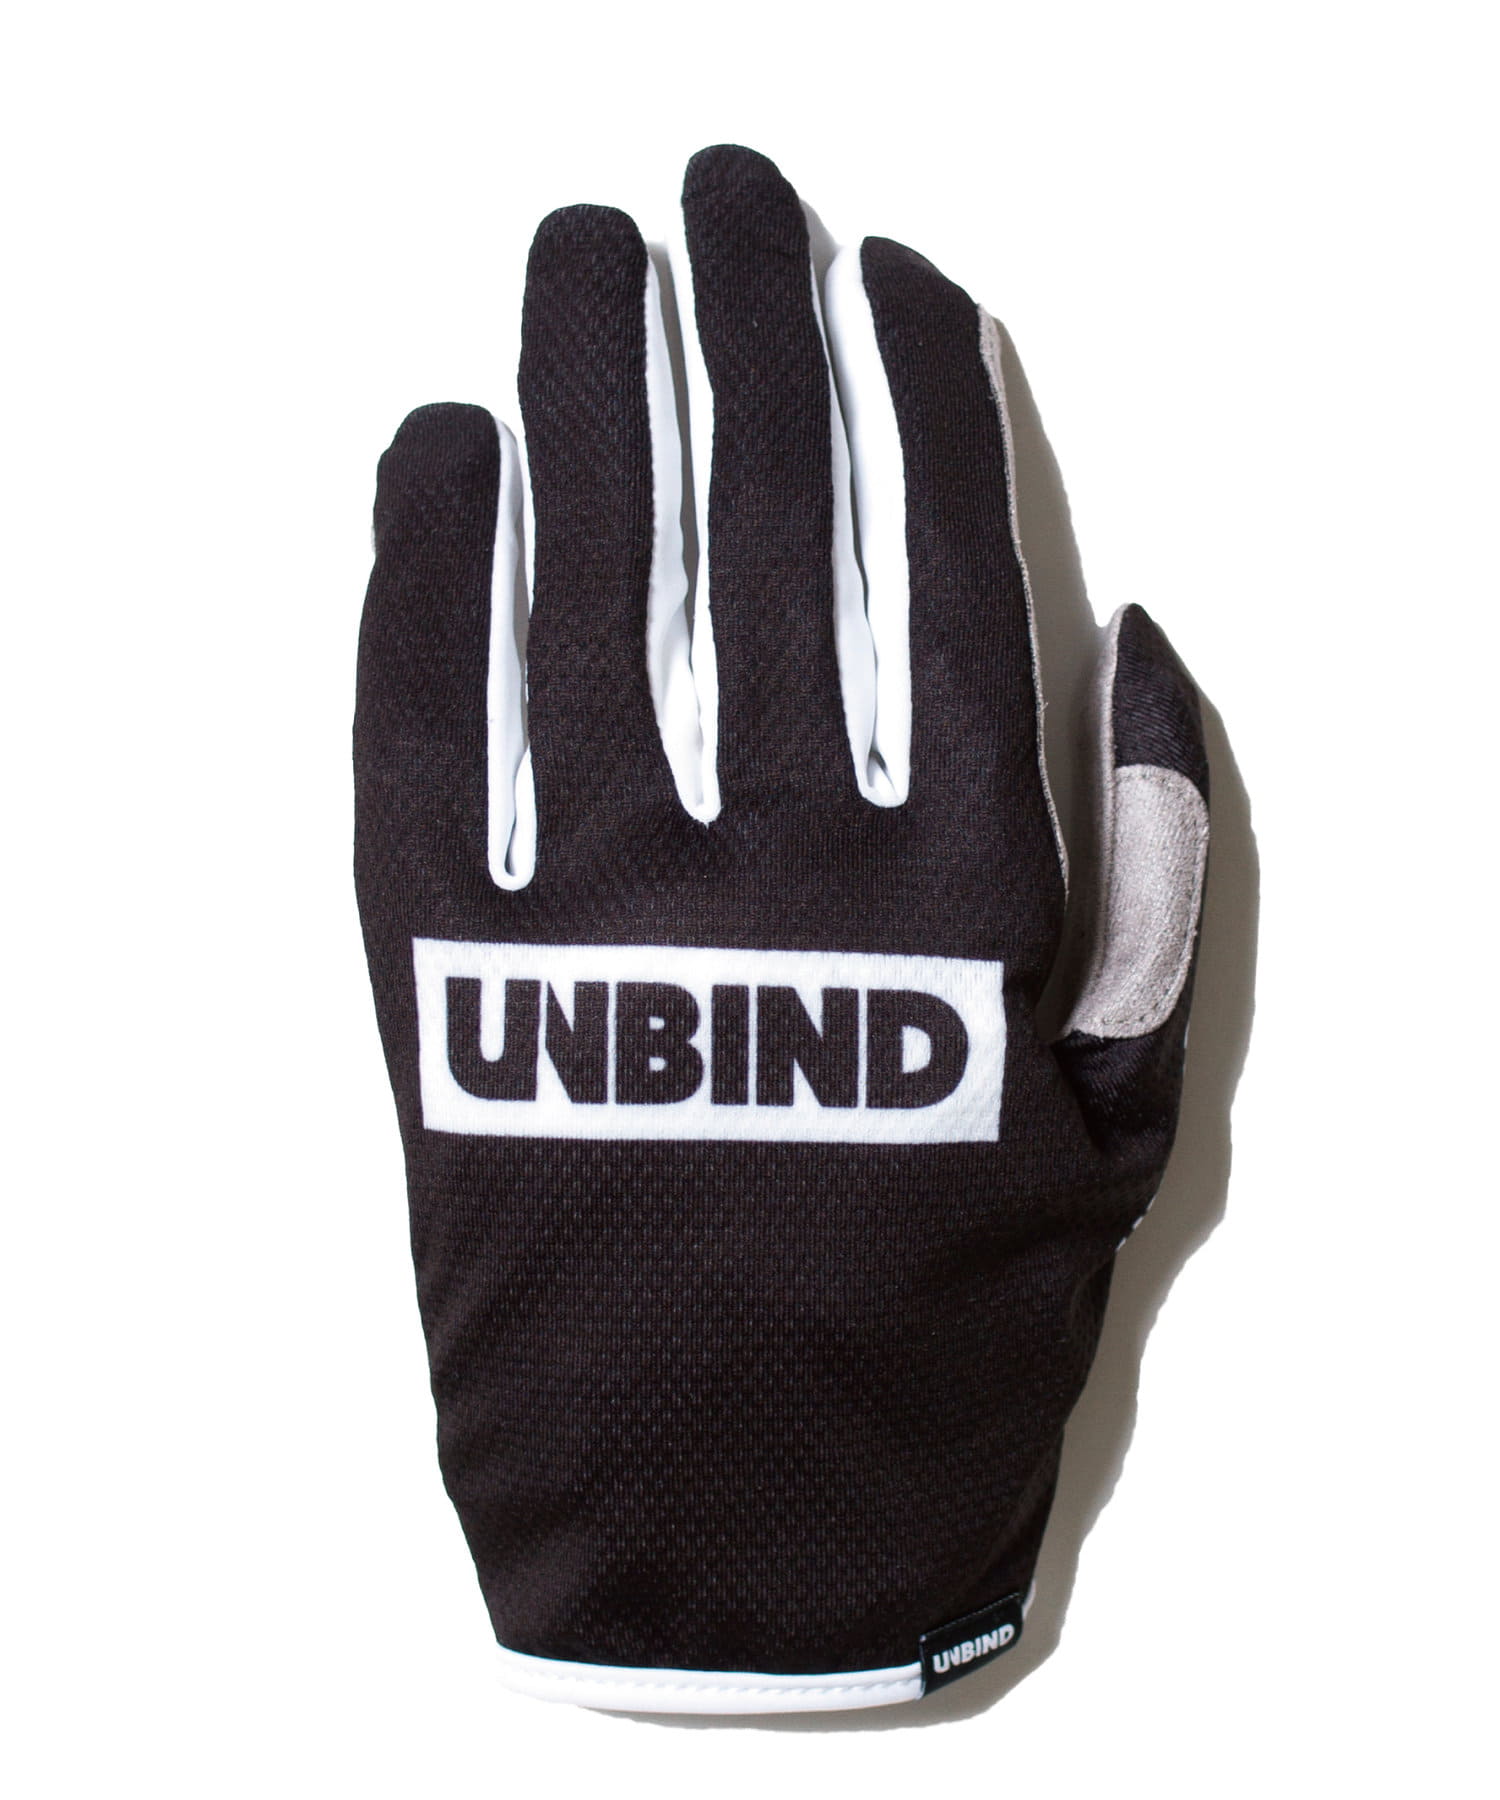 twoles(トゥレス) 【UNBIND】Freestyle Glove